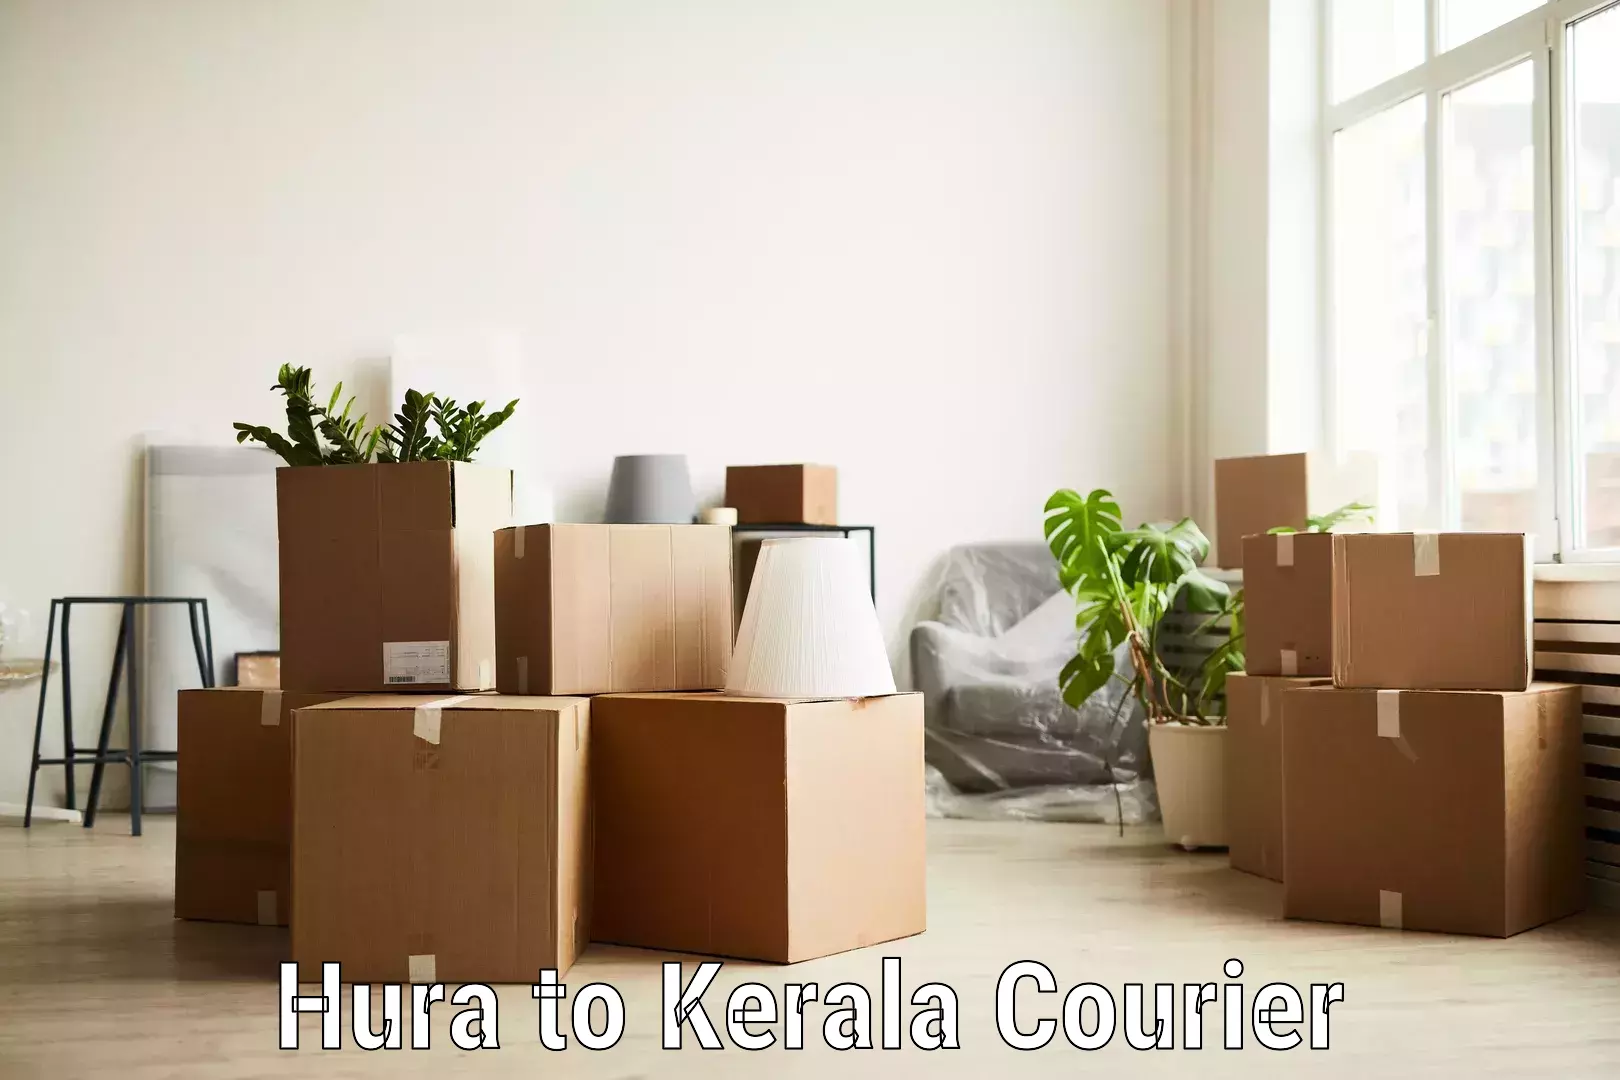 Sustainable shipping practices Hura to Kerala